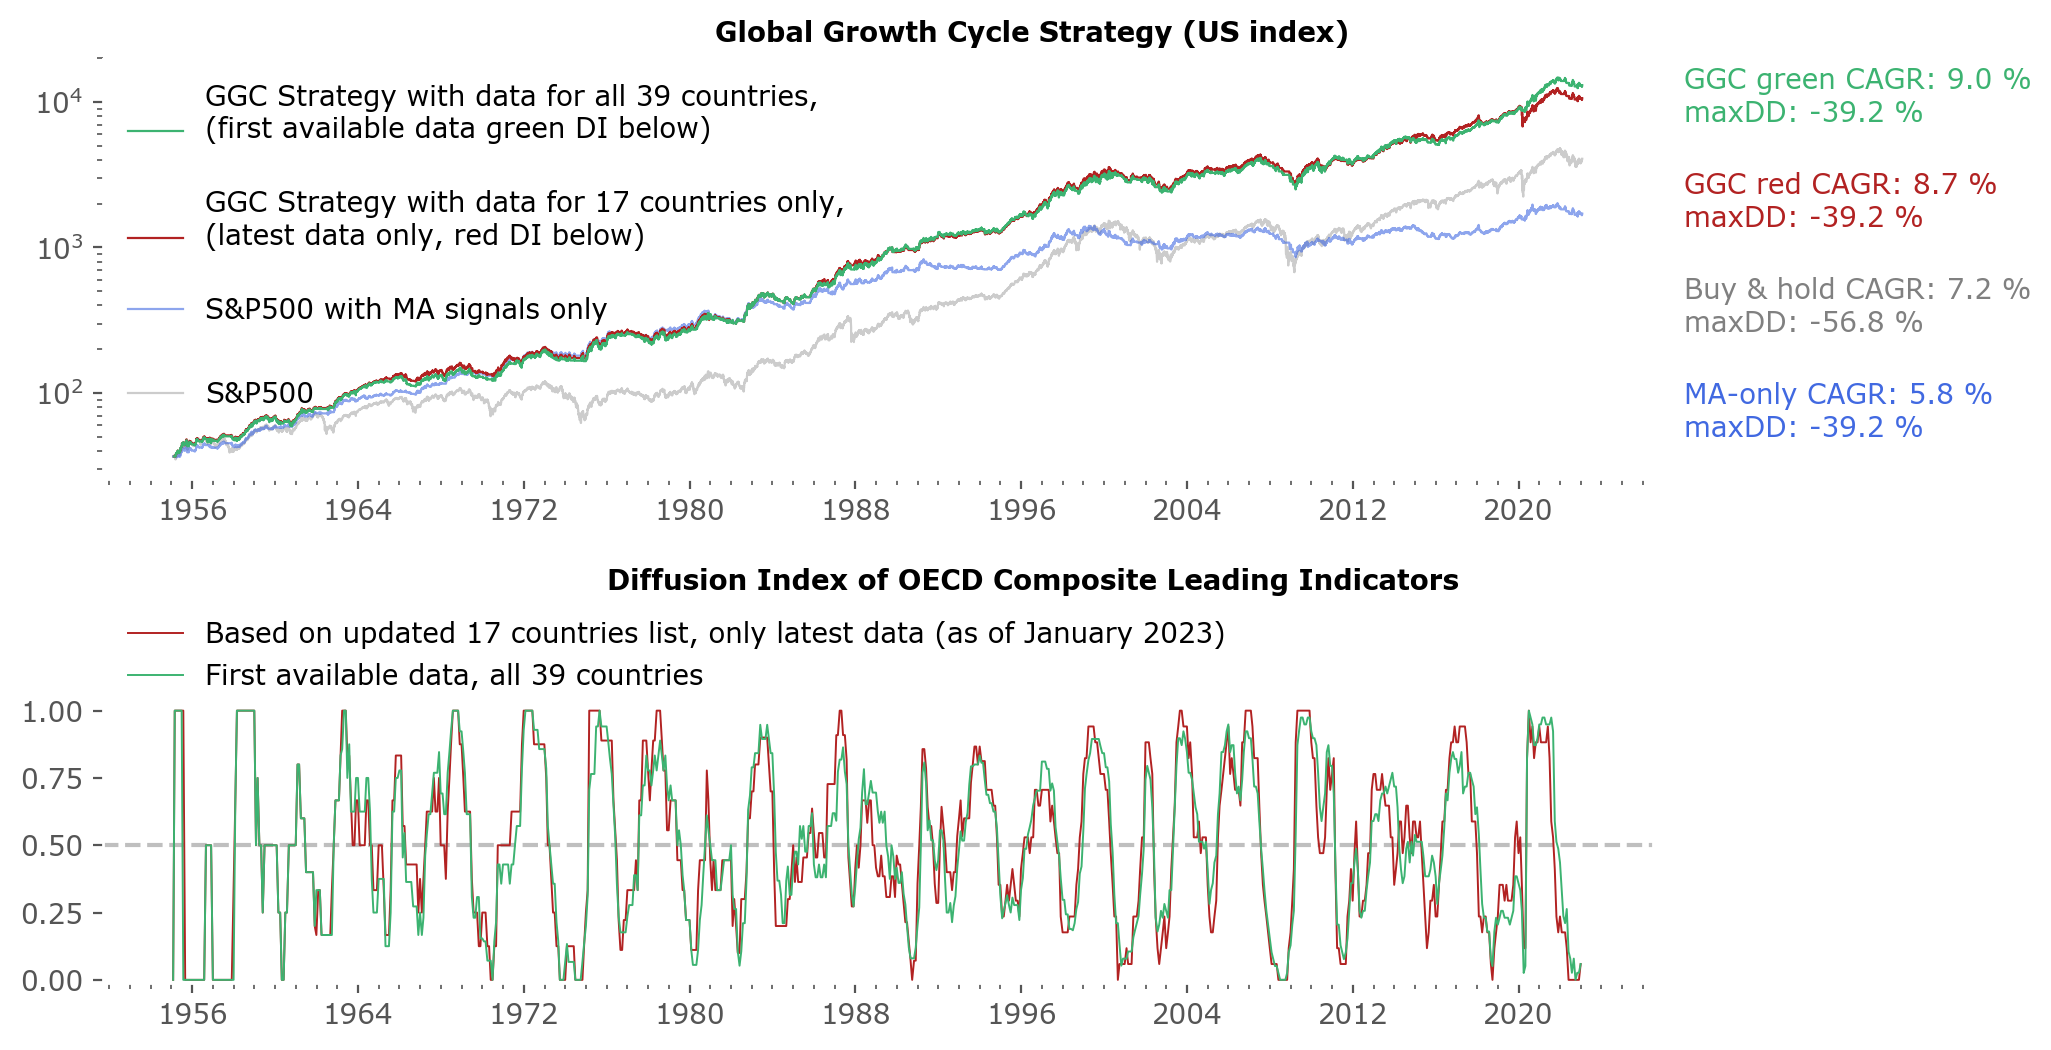 Global Growth Cycle strategy for the US market with different versions of the Diffusion Index